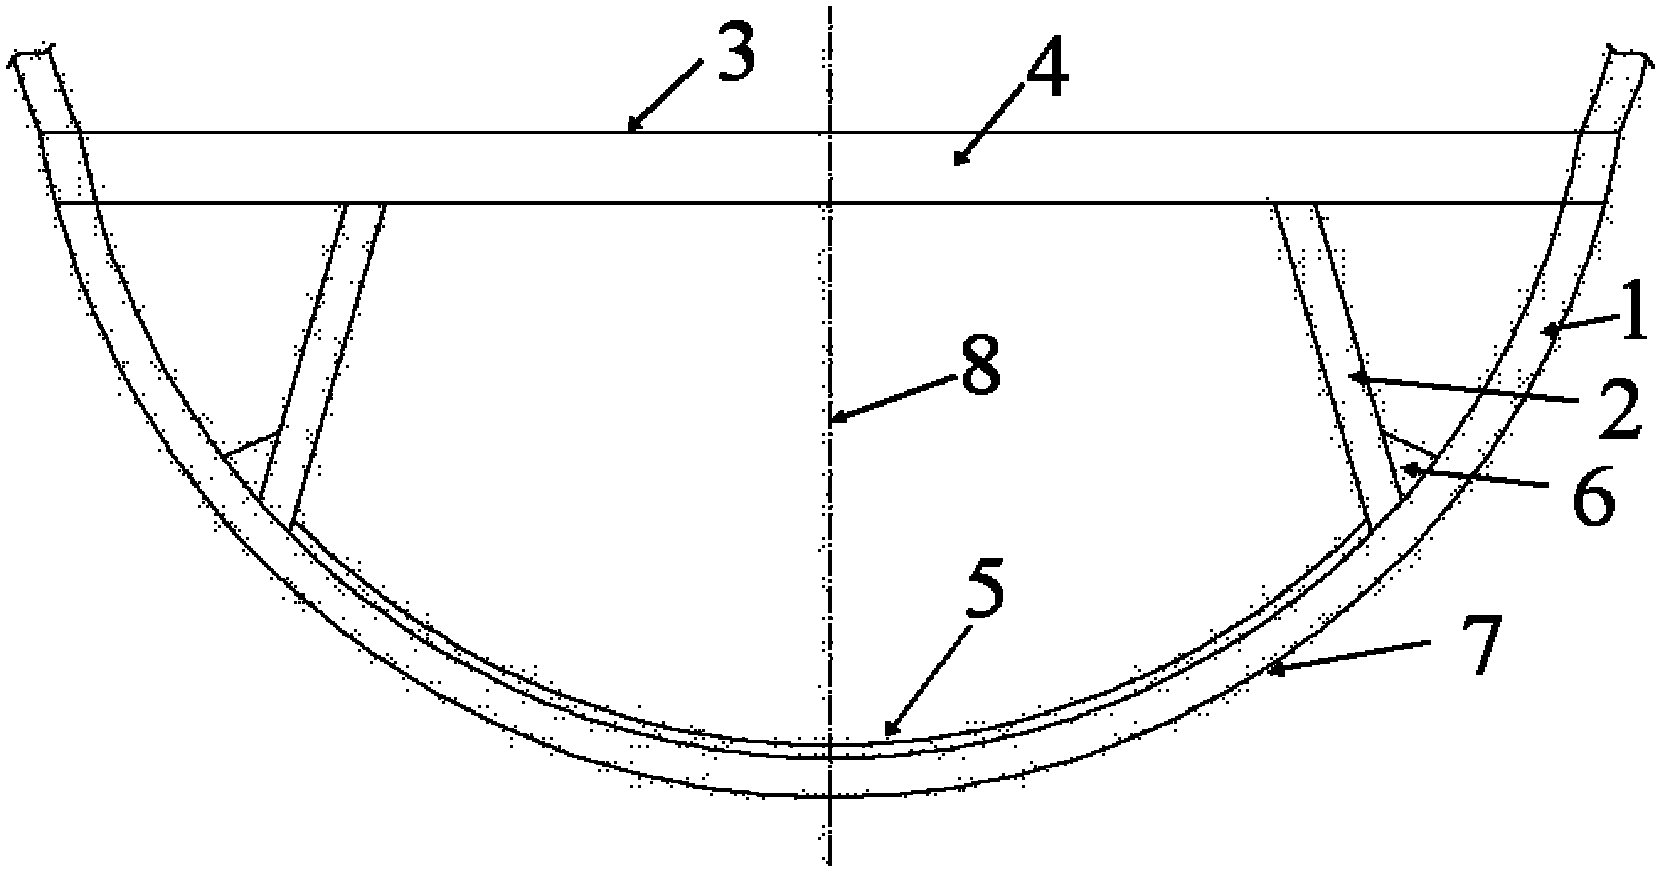 Energy absorption scheme and layout mode of lower square tube supporting rod structure of passenger cabin floor of civil aircraft